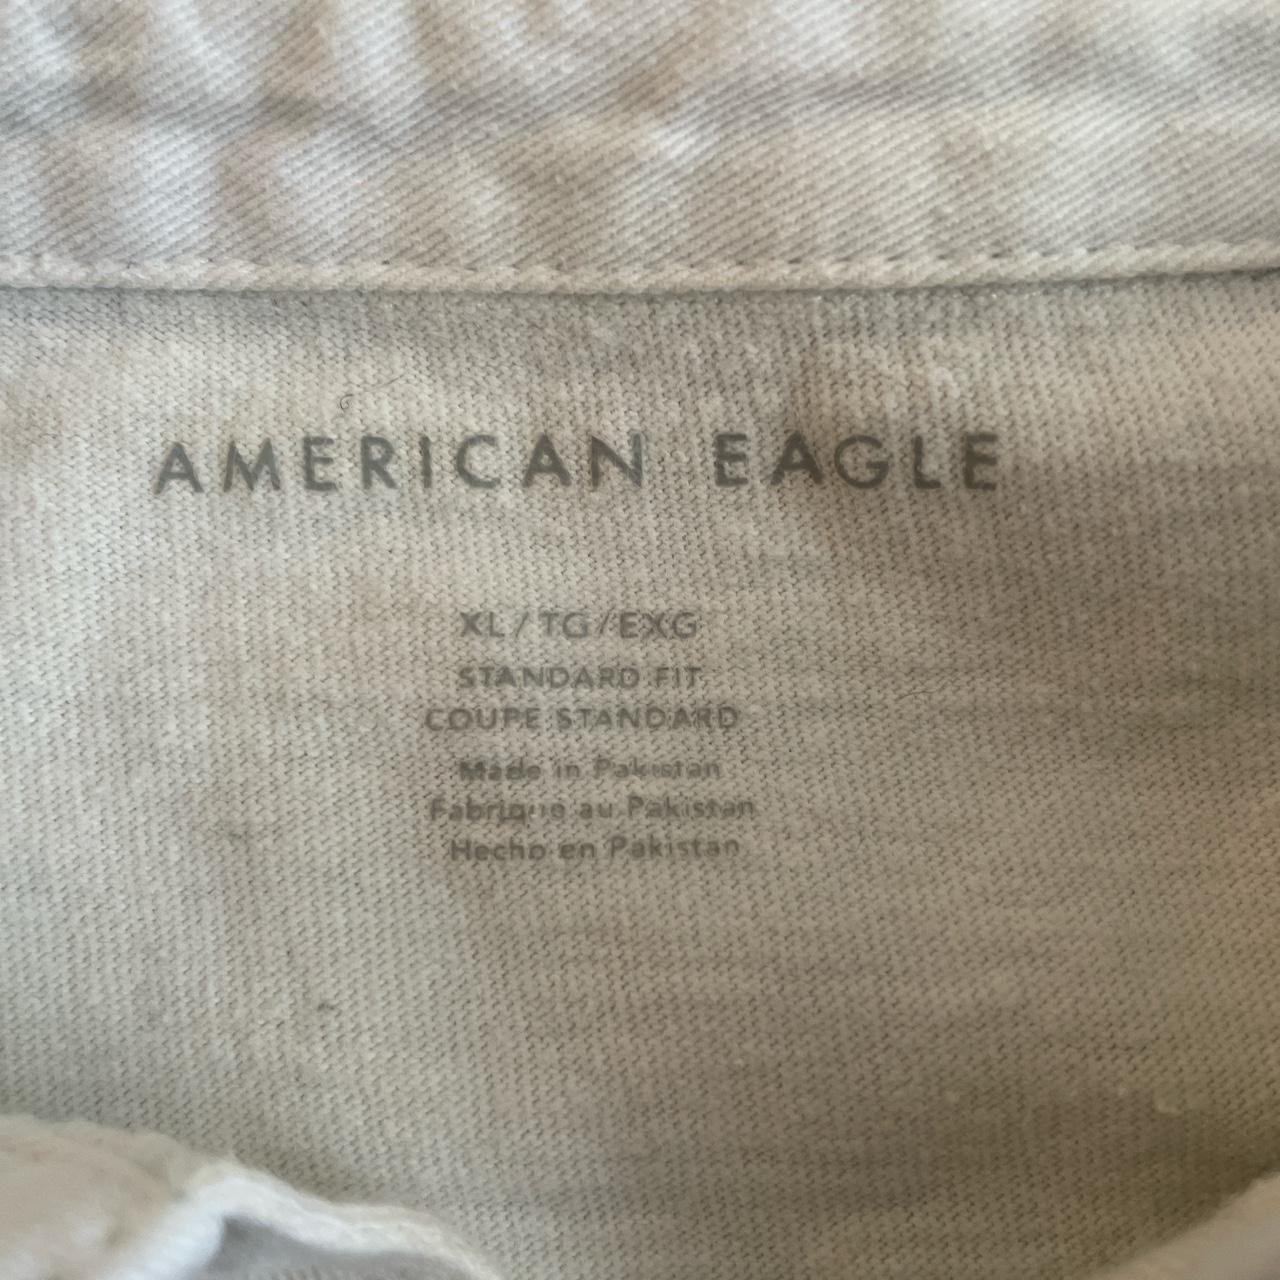 American Eagle Rugby shirt Condition: Almost new,... - Depop